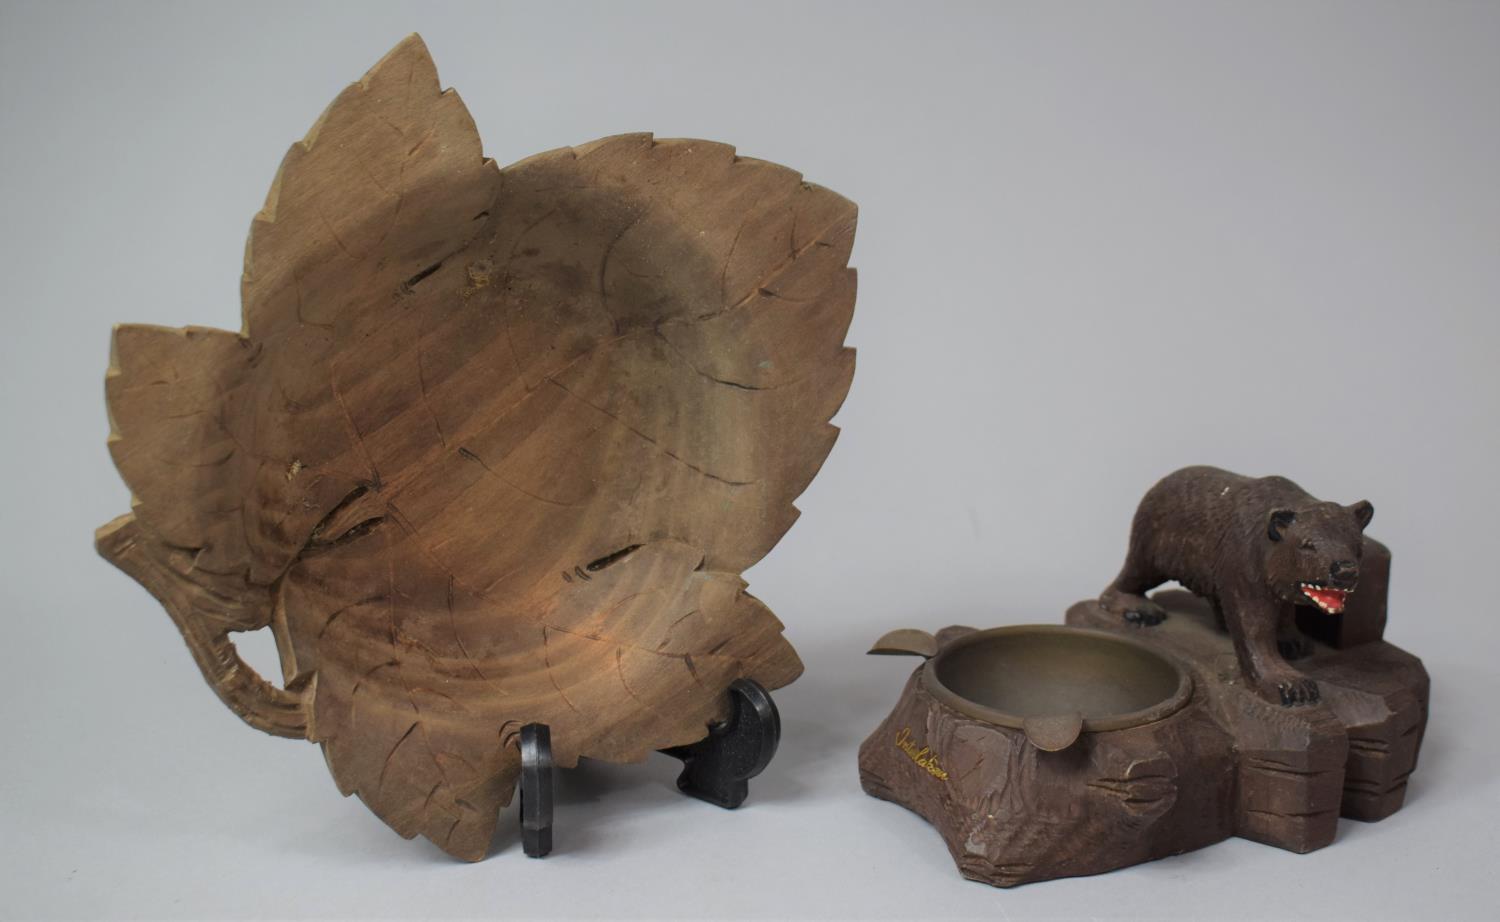 A Black Forest Carved Wooden Novelty Ashtray In the Form of a Bear Together with a Carved Wooden